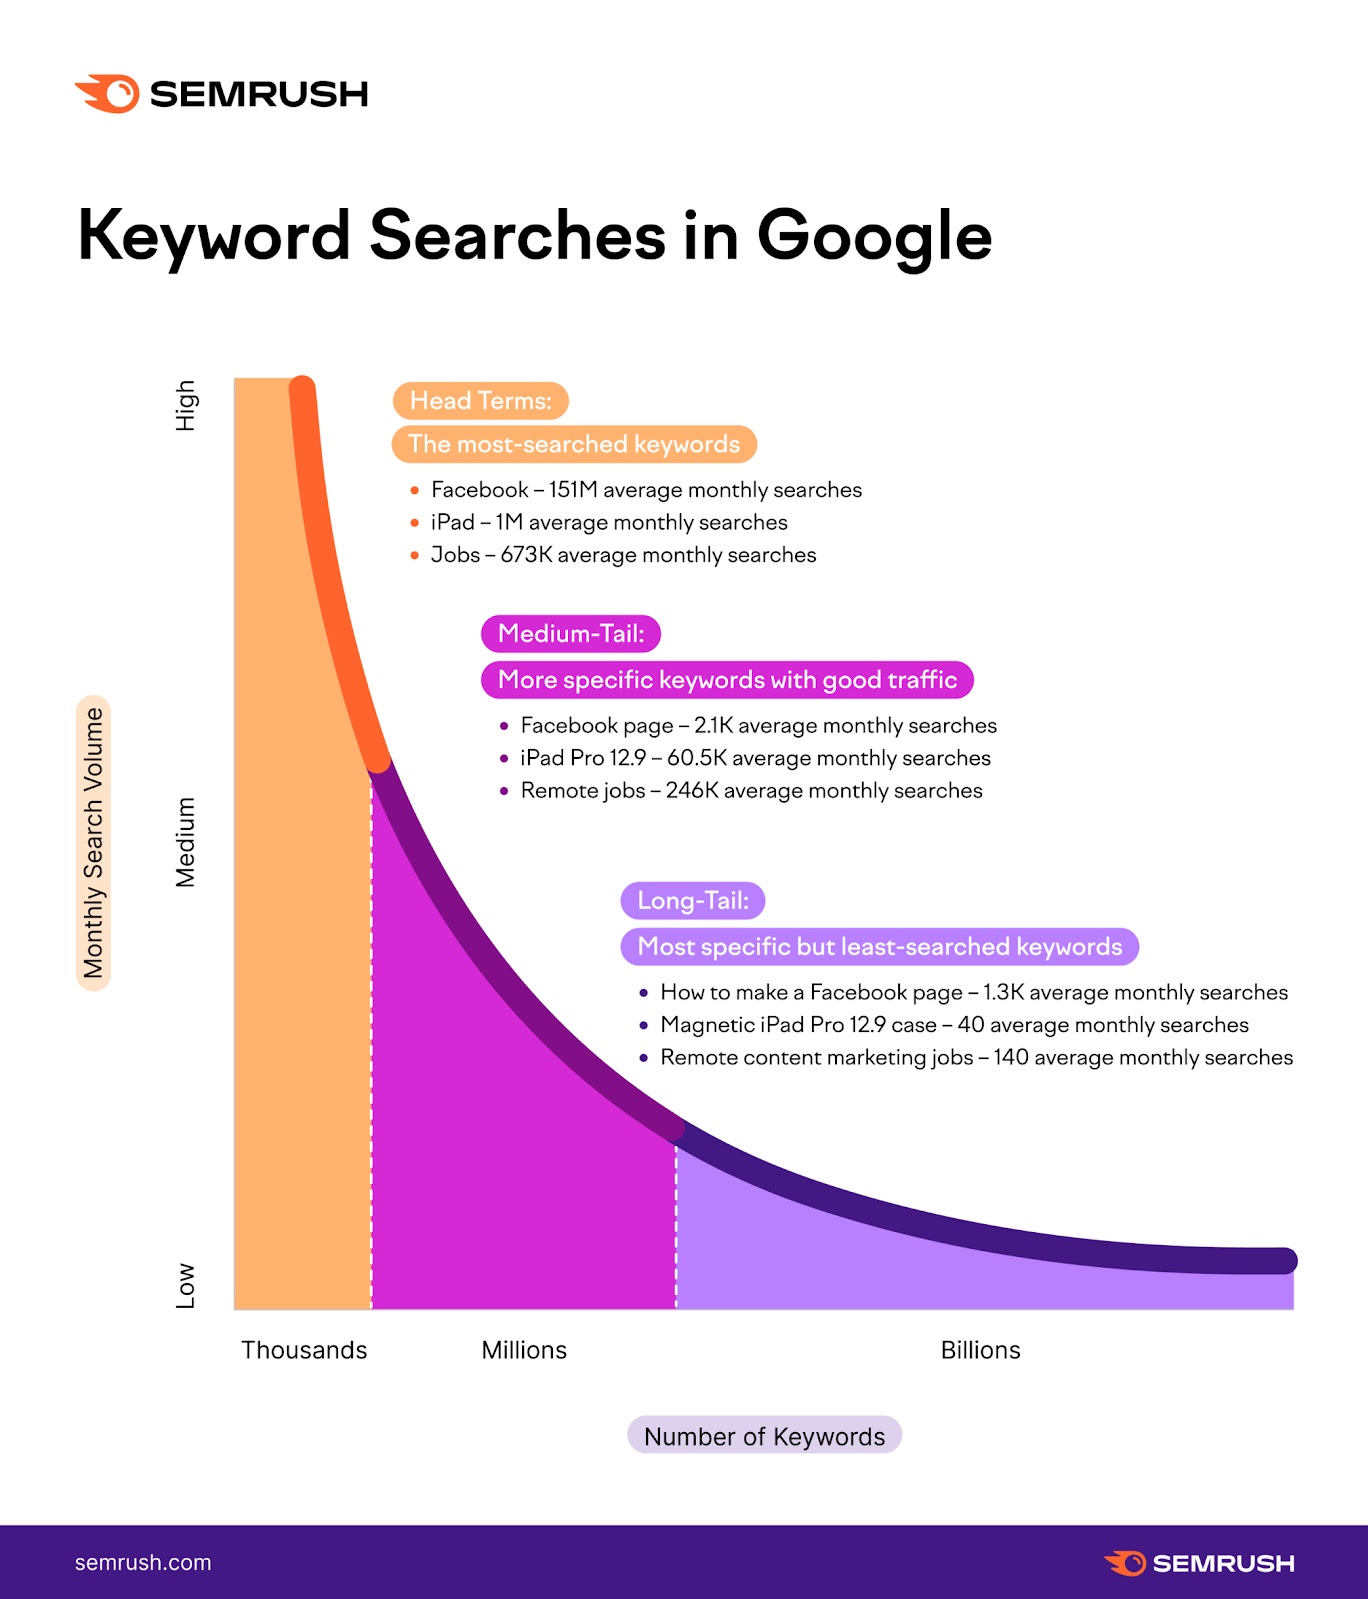 A graph showing keyword searches in Google, with monthly search volume and number of keywords metrics